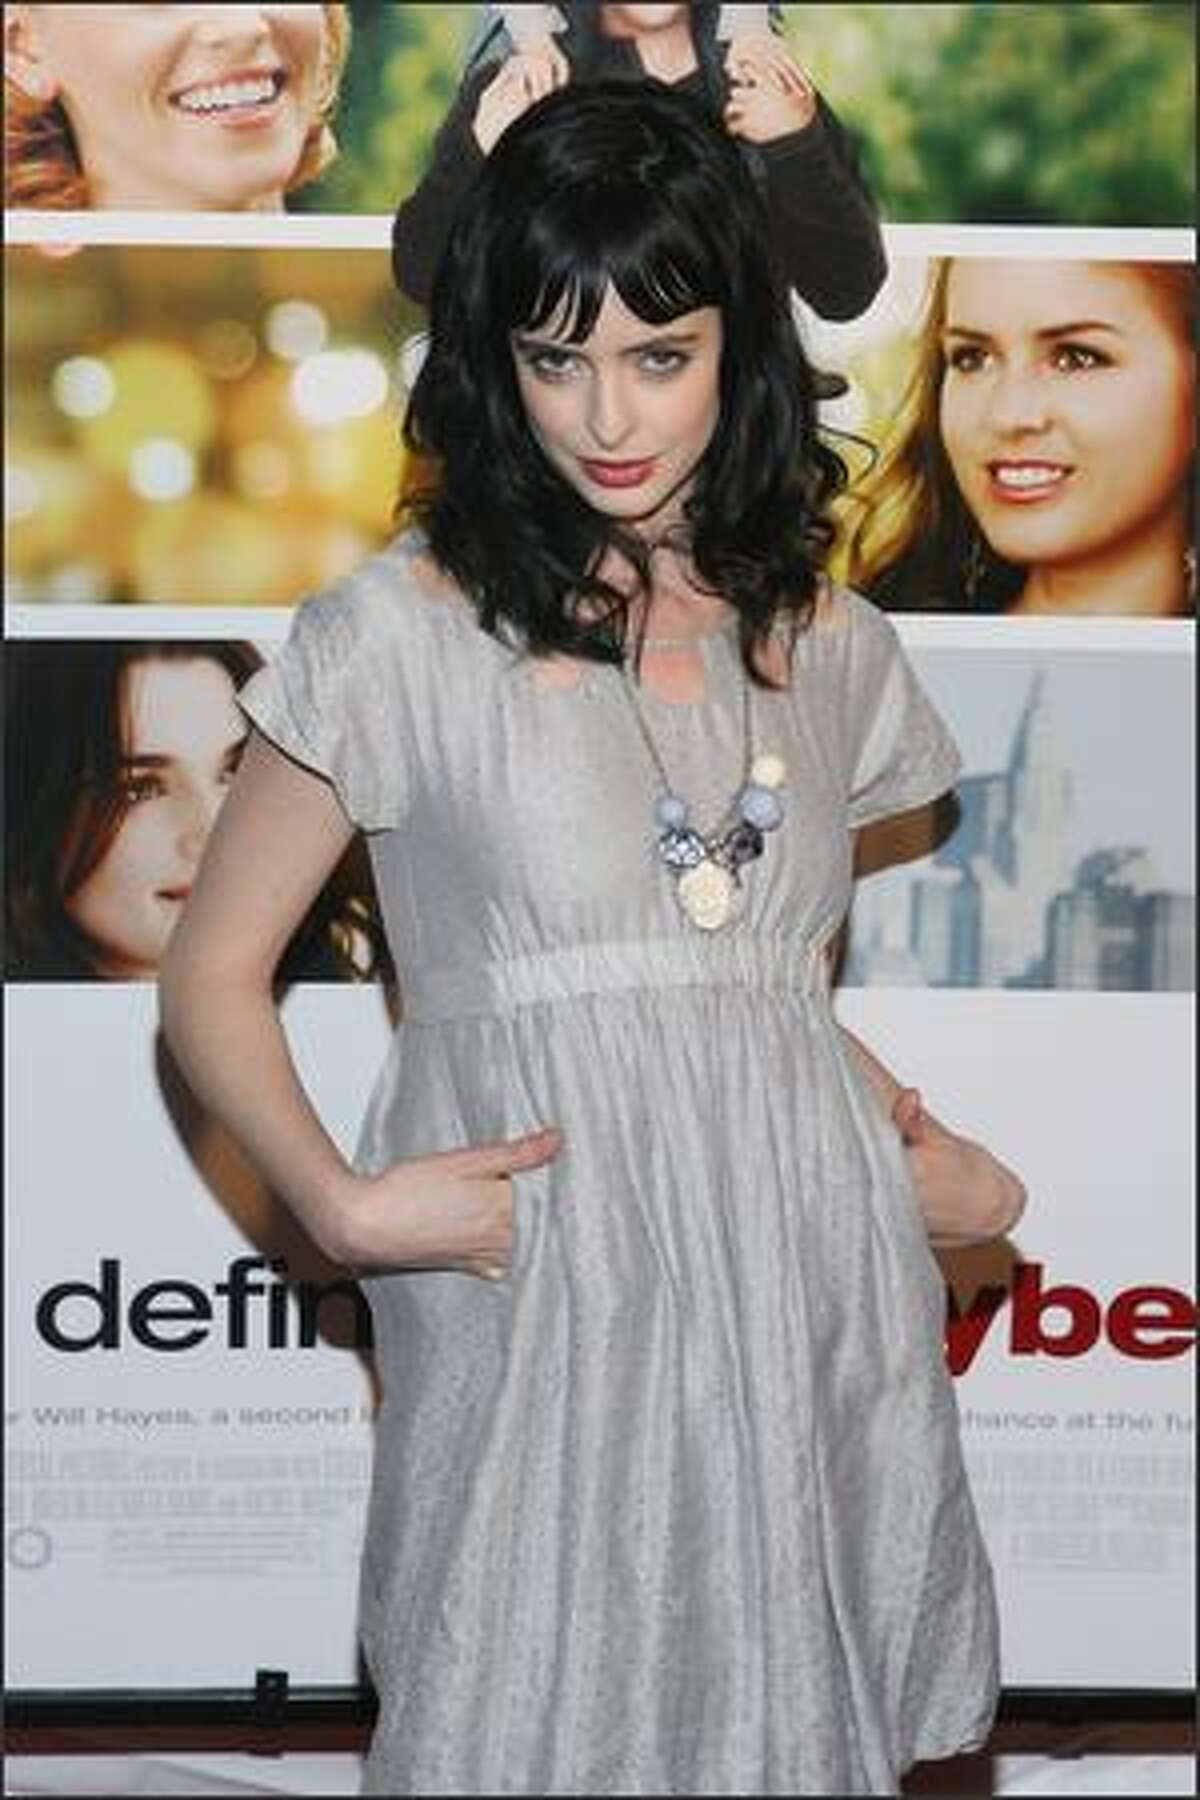 Actress Krysten Ritter attends the premiere of "Definitely, Maybe" at the Ziegfeld Theater on Tuesday in New York City.